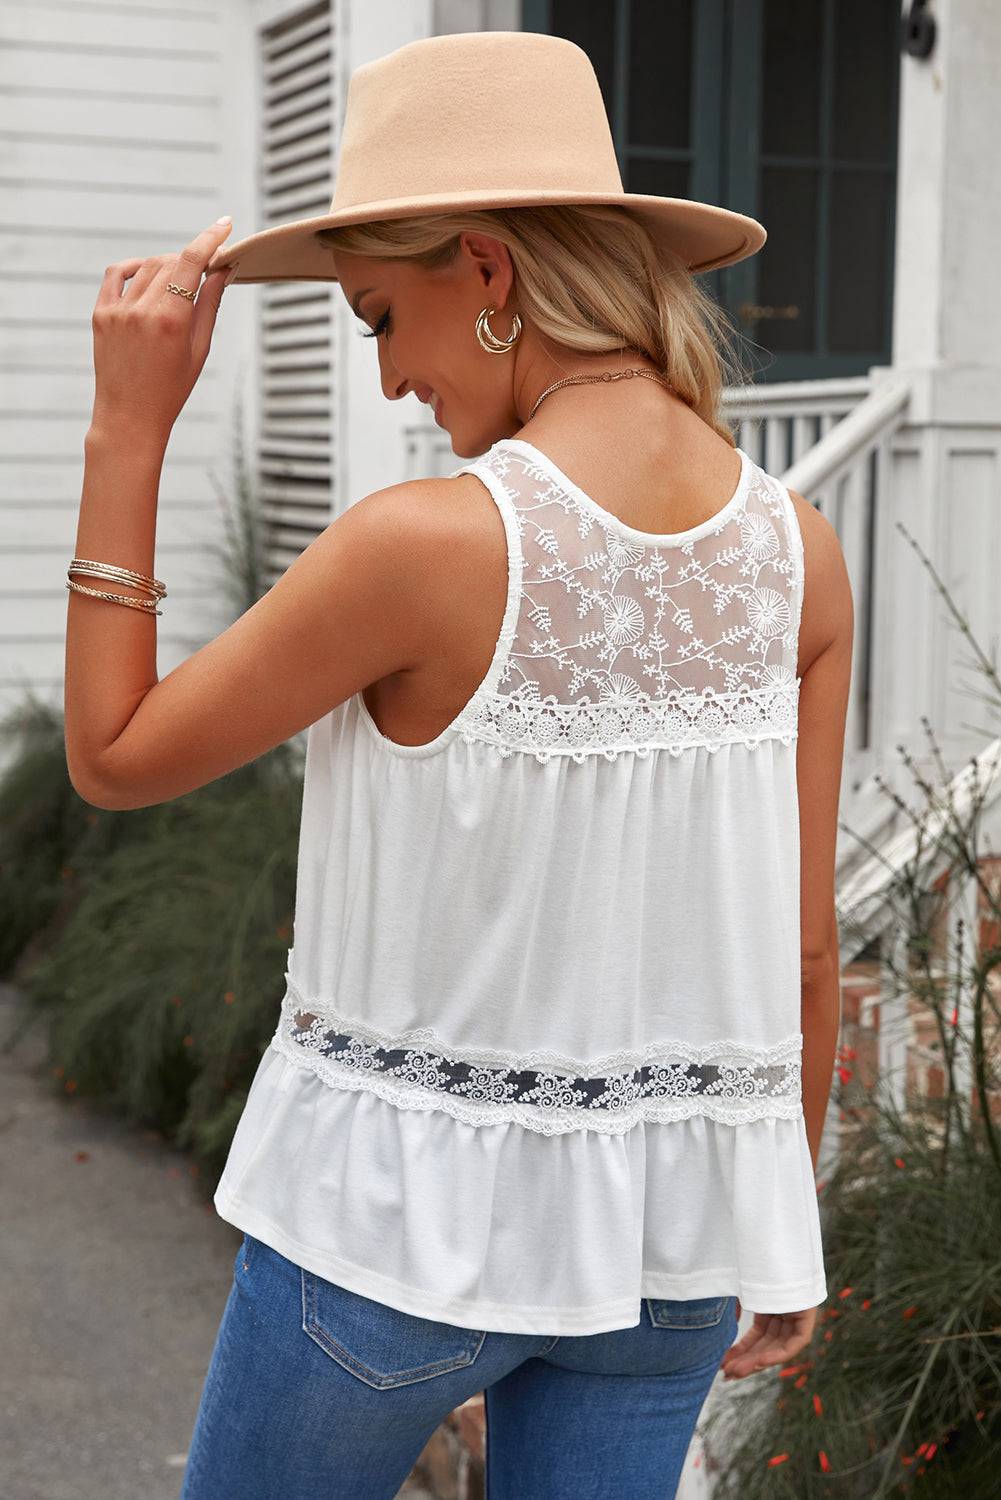 Capture the essence of love with our Lace Yoke Peplum Tank - Indulge in romance and feel like royalty, elegantly accentuating your curves. - Guy Christopher